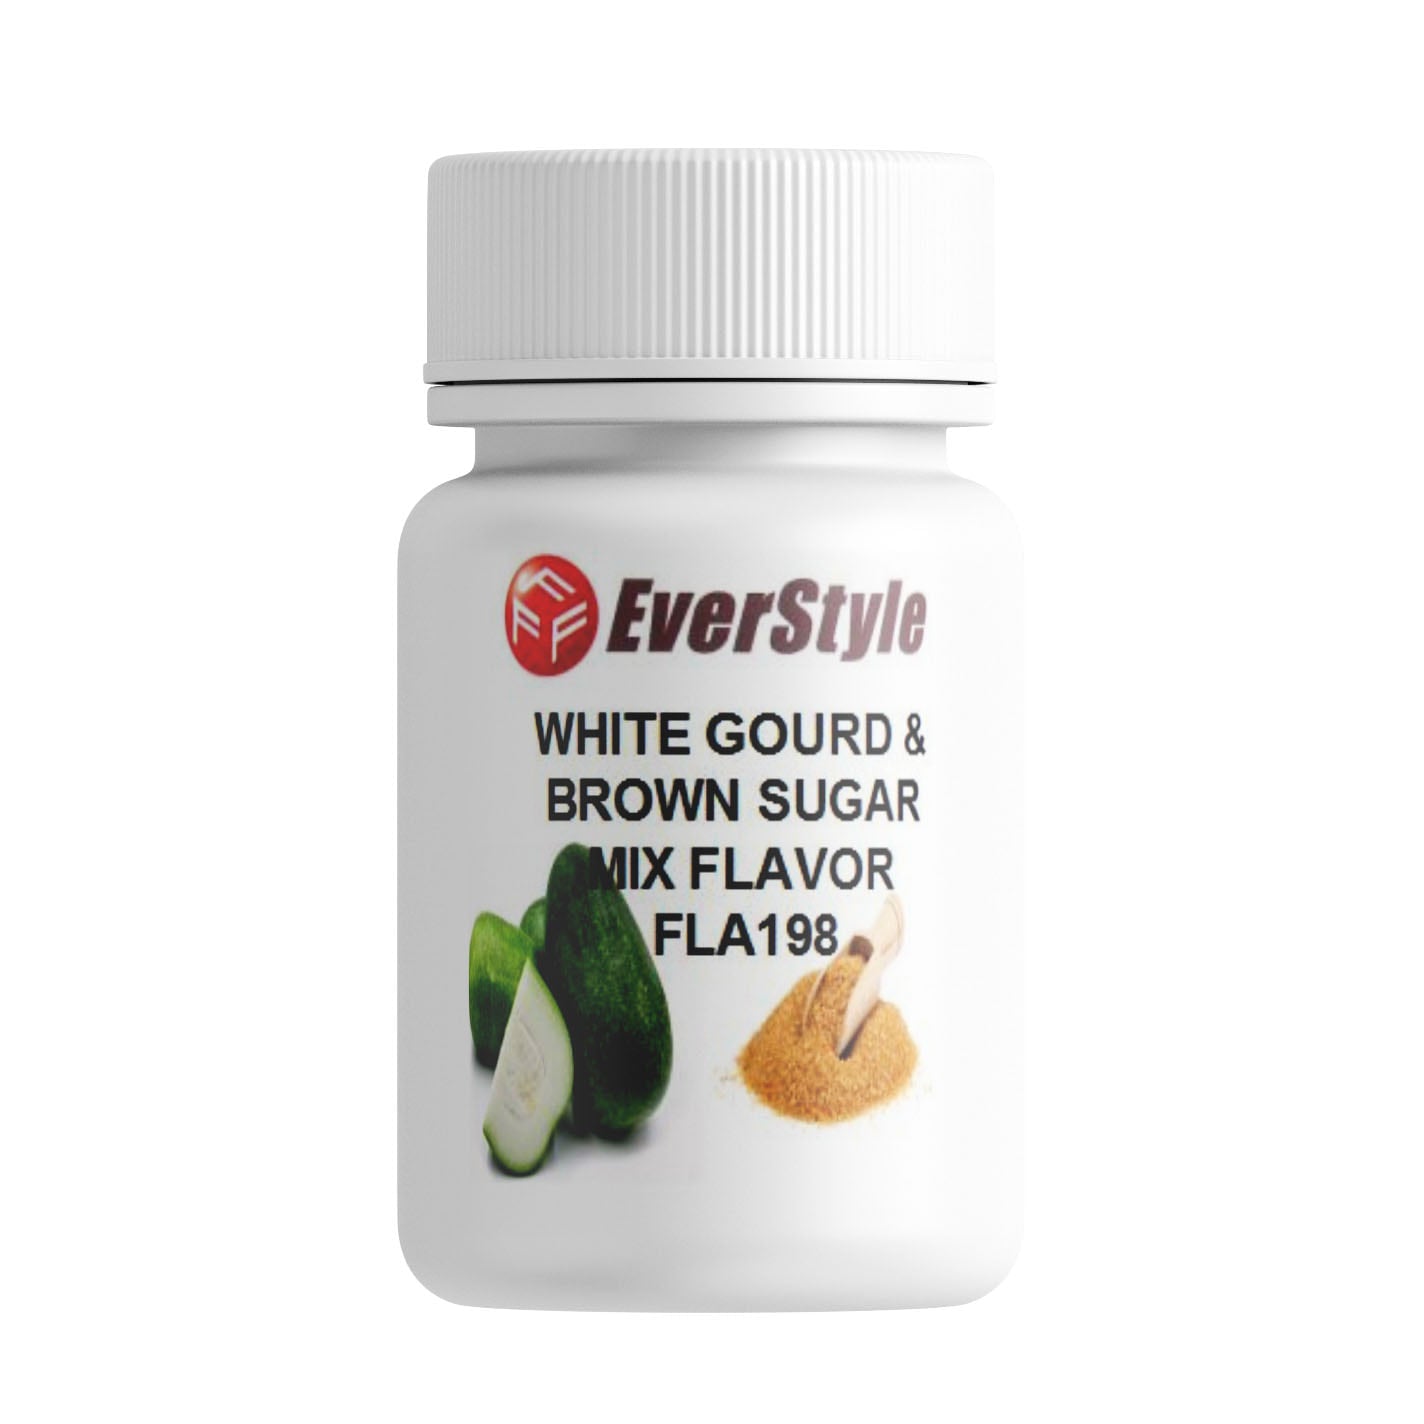 Everstyle White Gourd & Brown Suagr Mix Flavor 30g (FLA198)